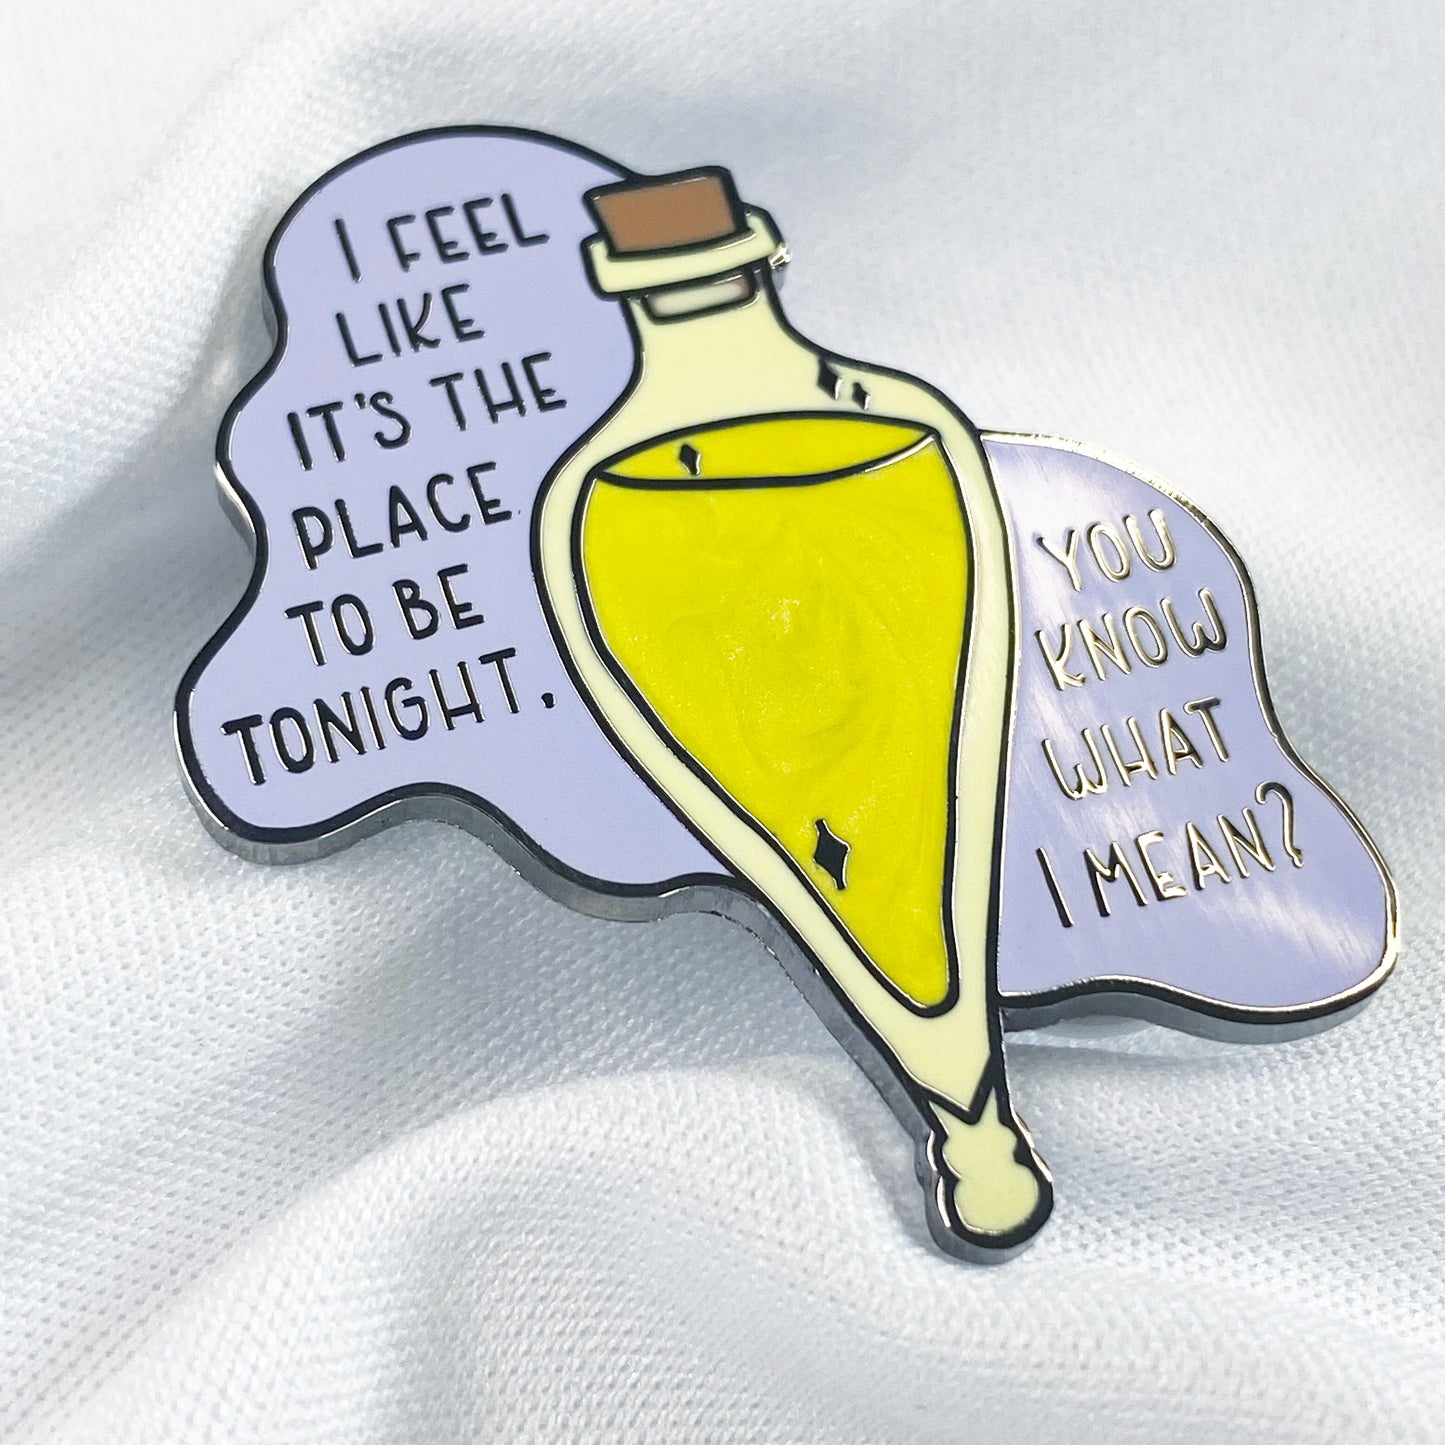 the place to be tonight enamel pin